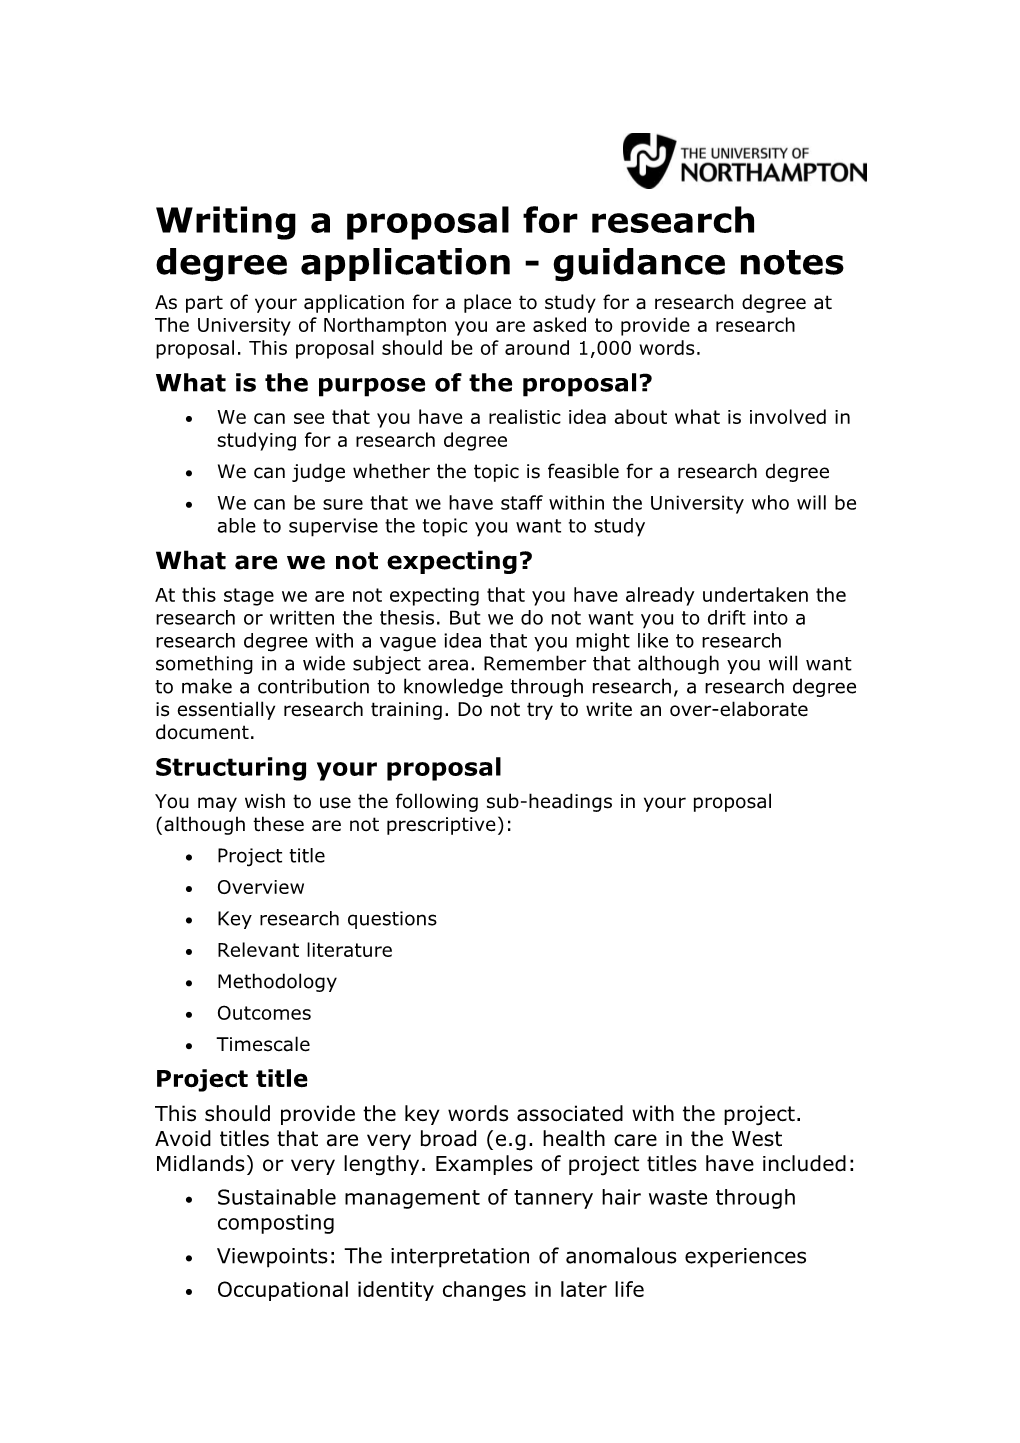 Writing a Proposal for Research Degree Application - Guidance Notes